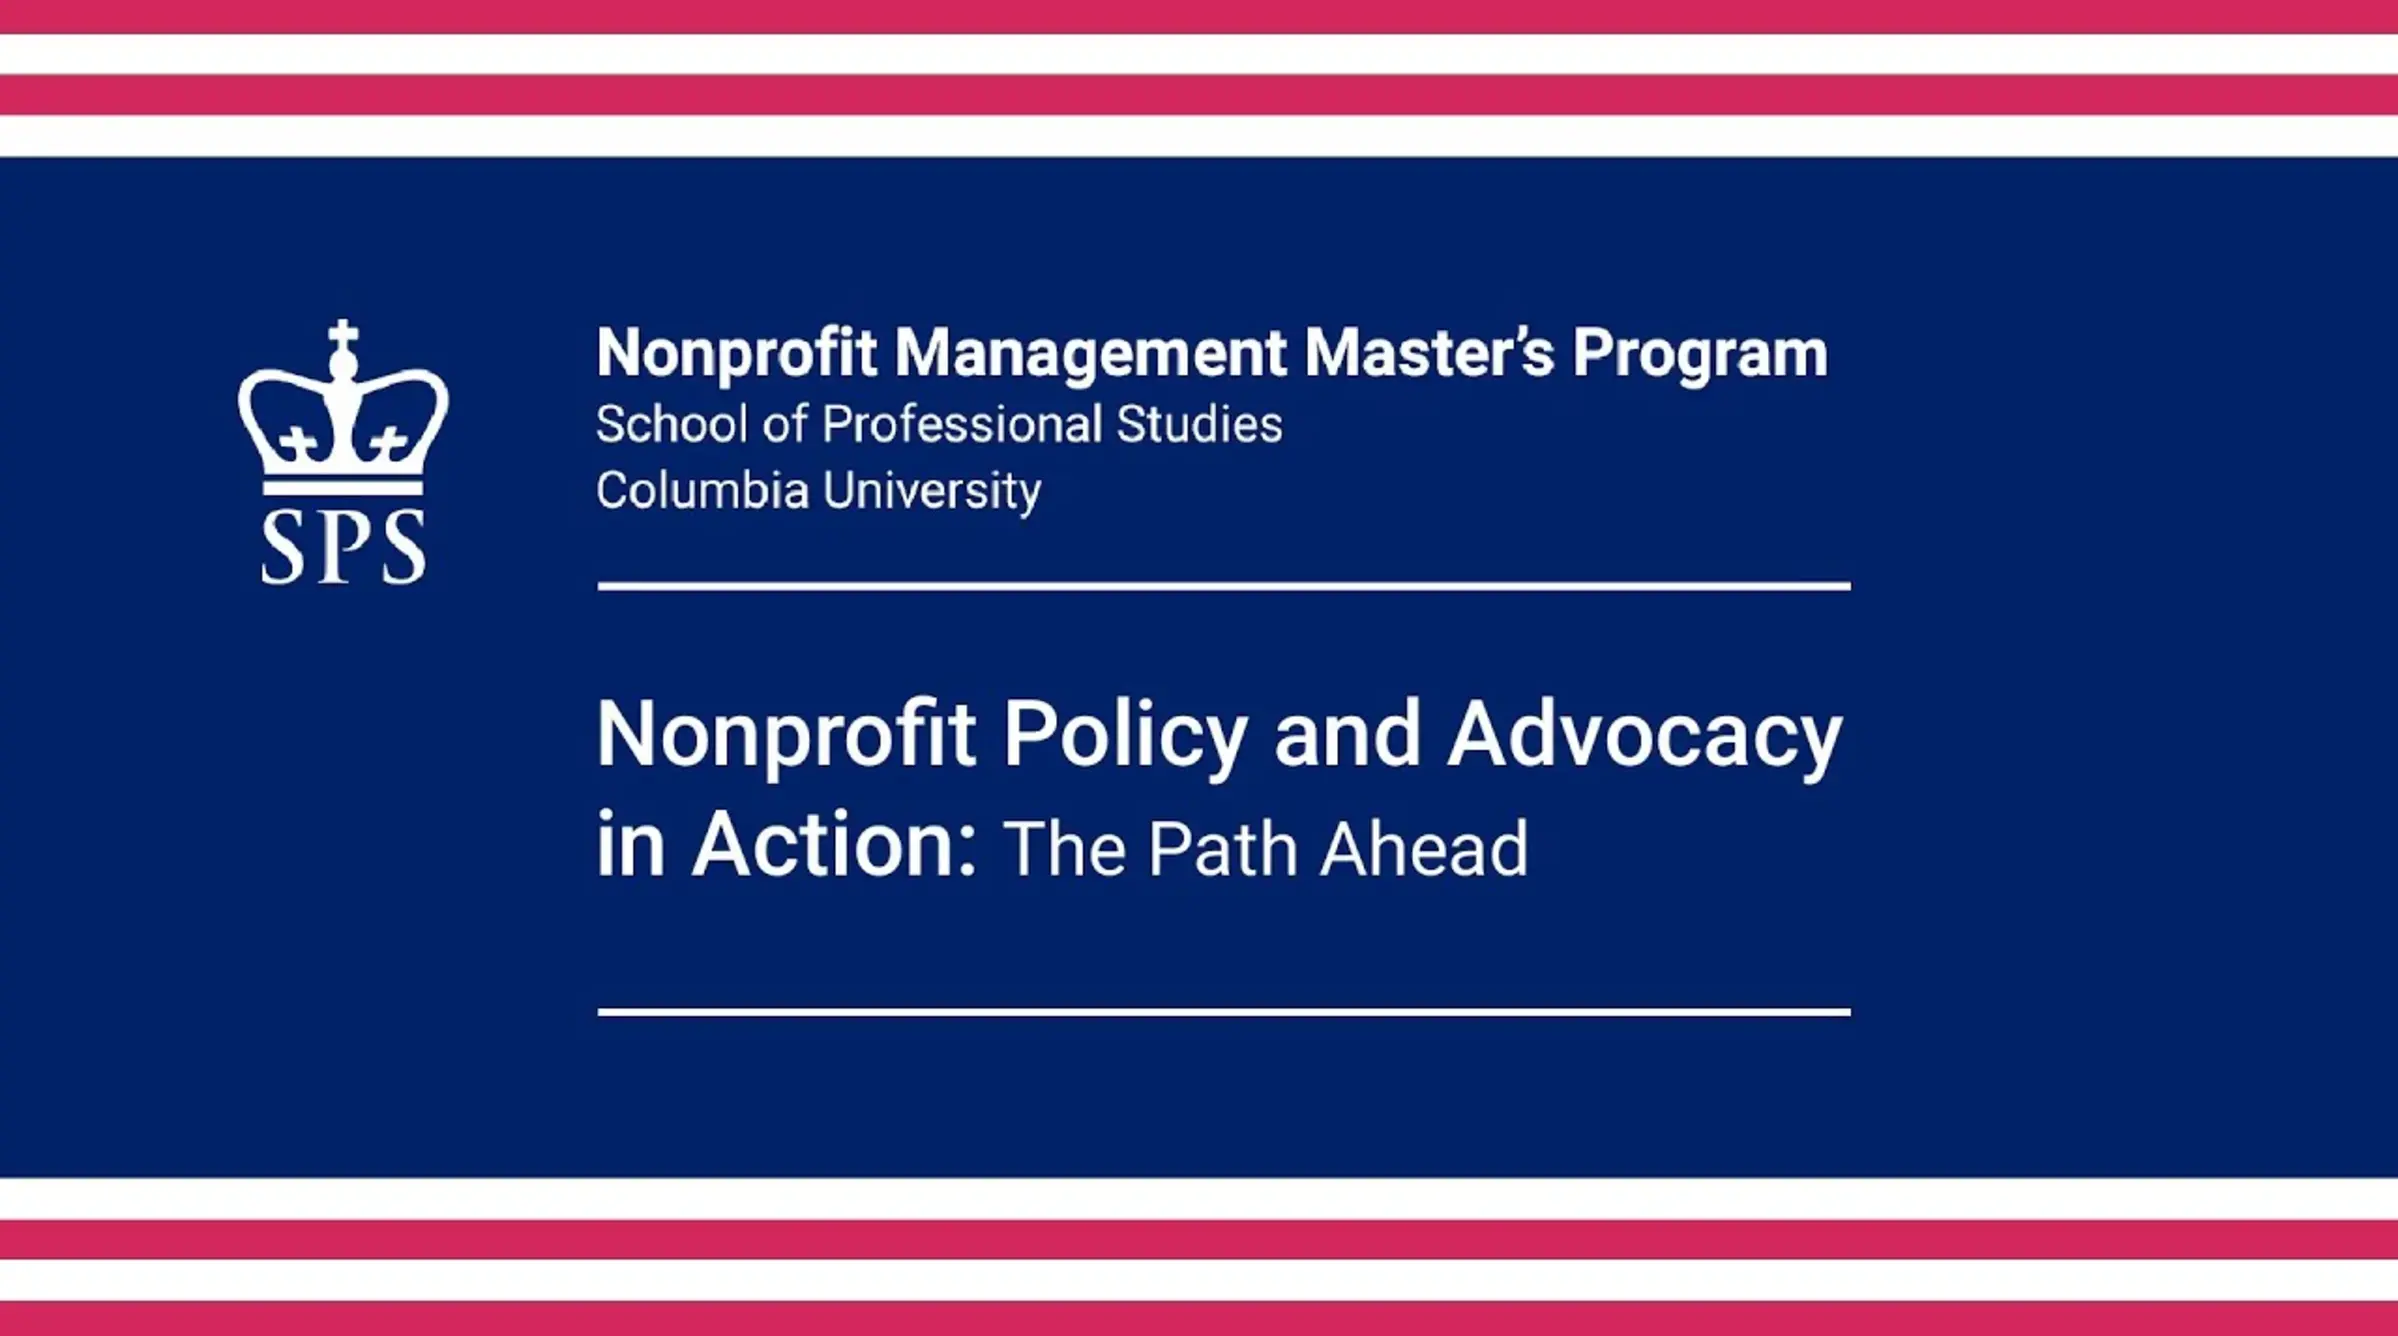 Nonprofit Policy and Advocacy in Action: The Path Ahead